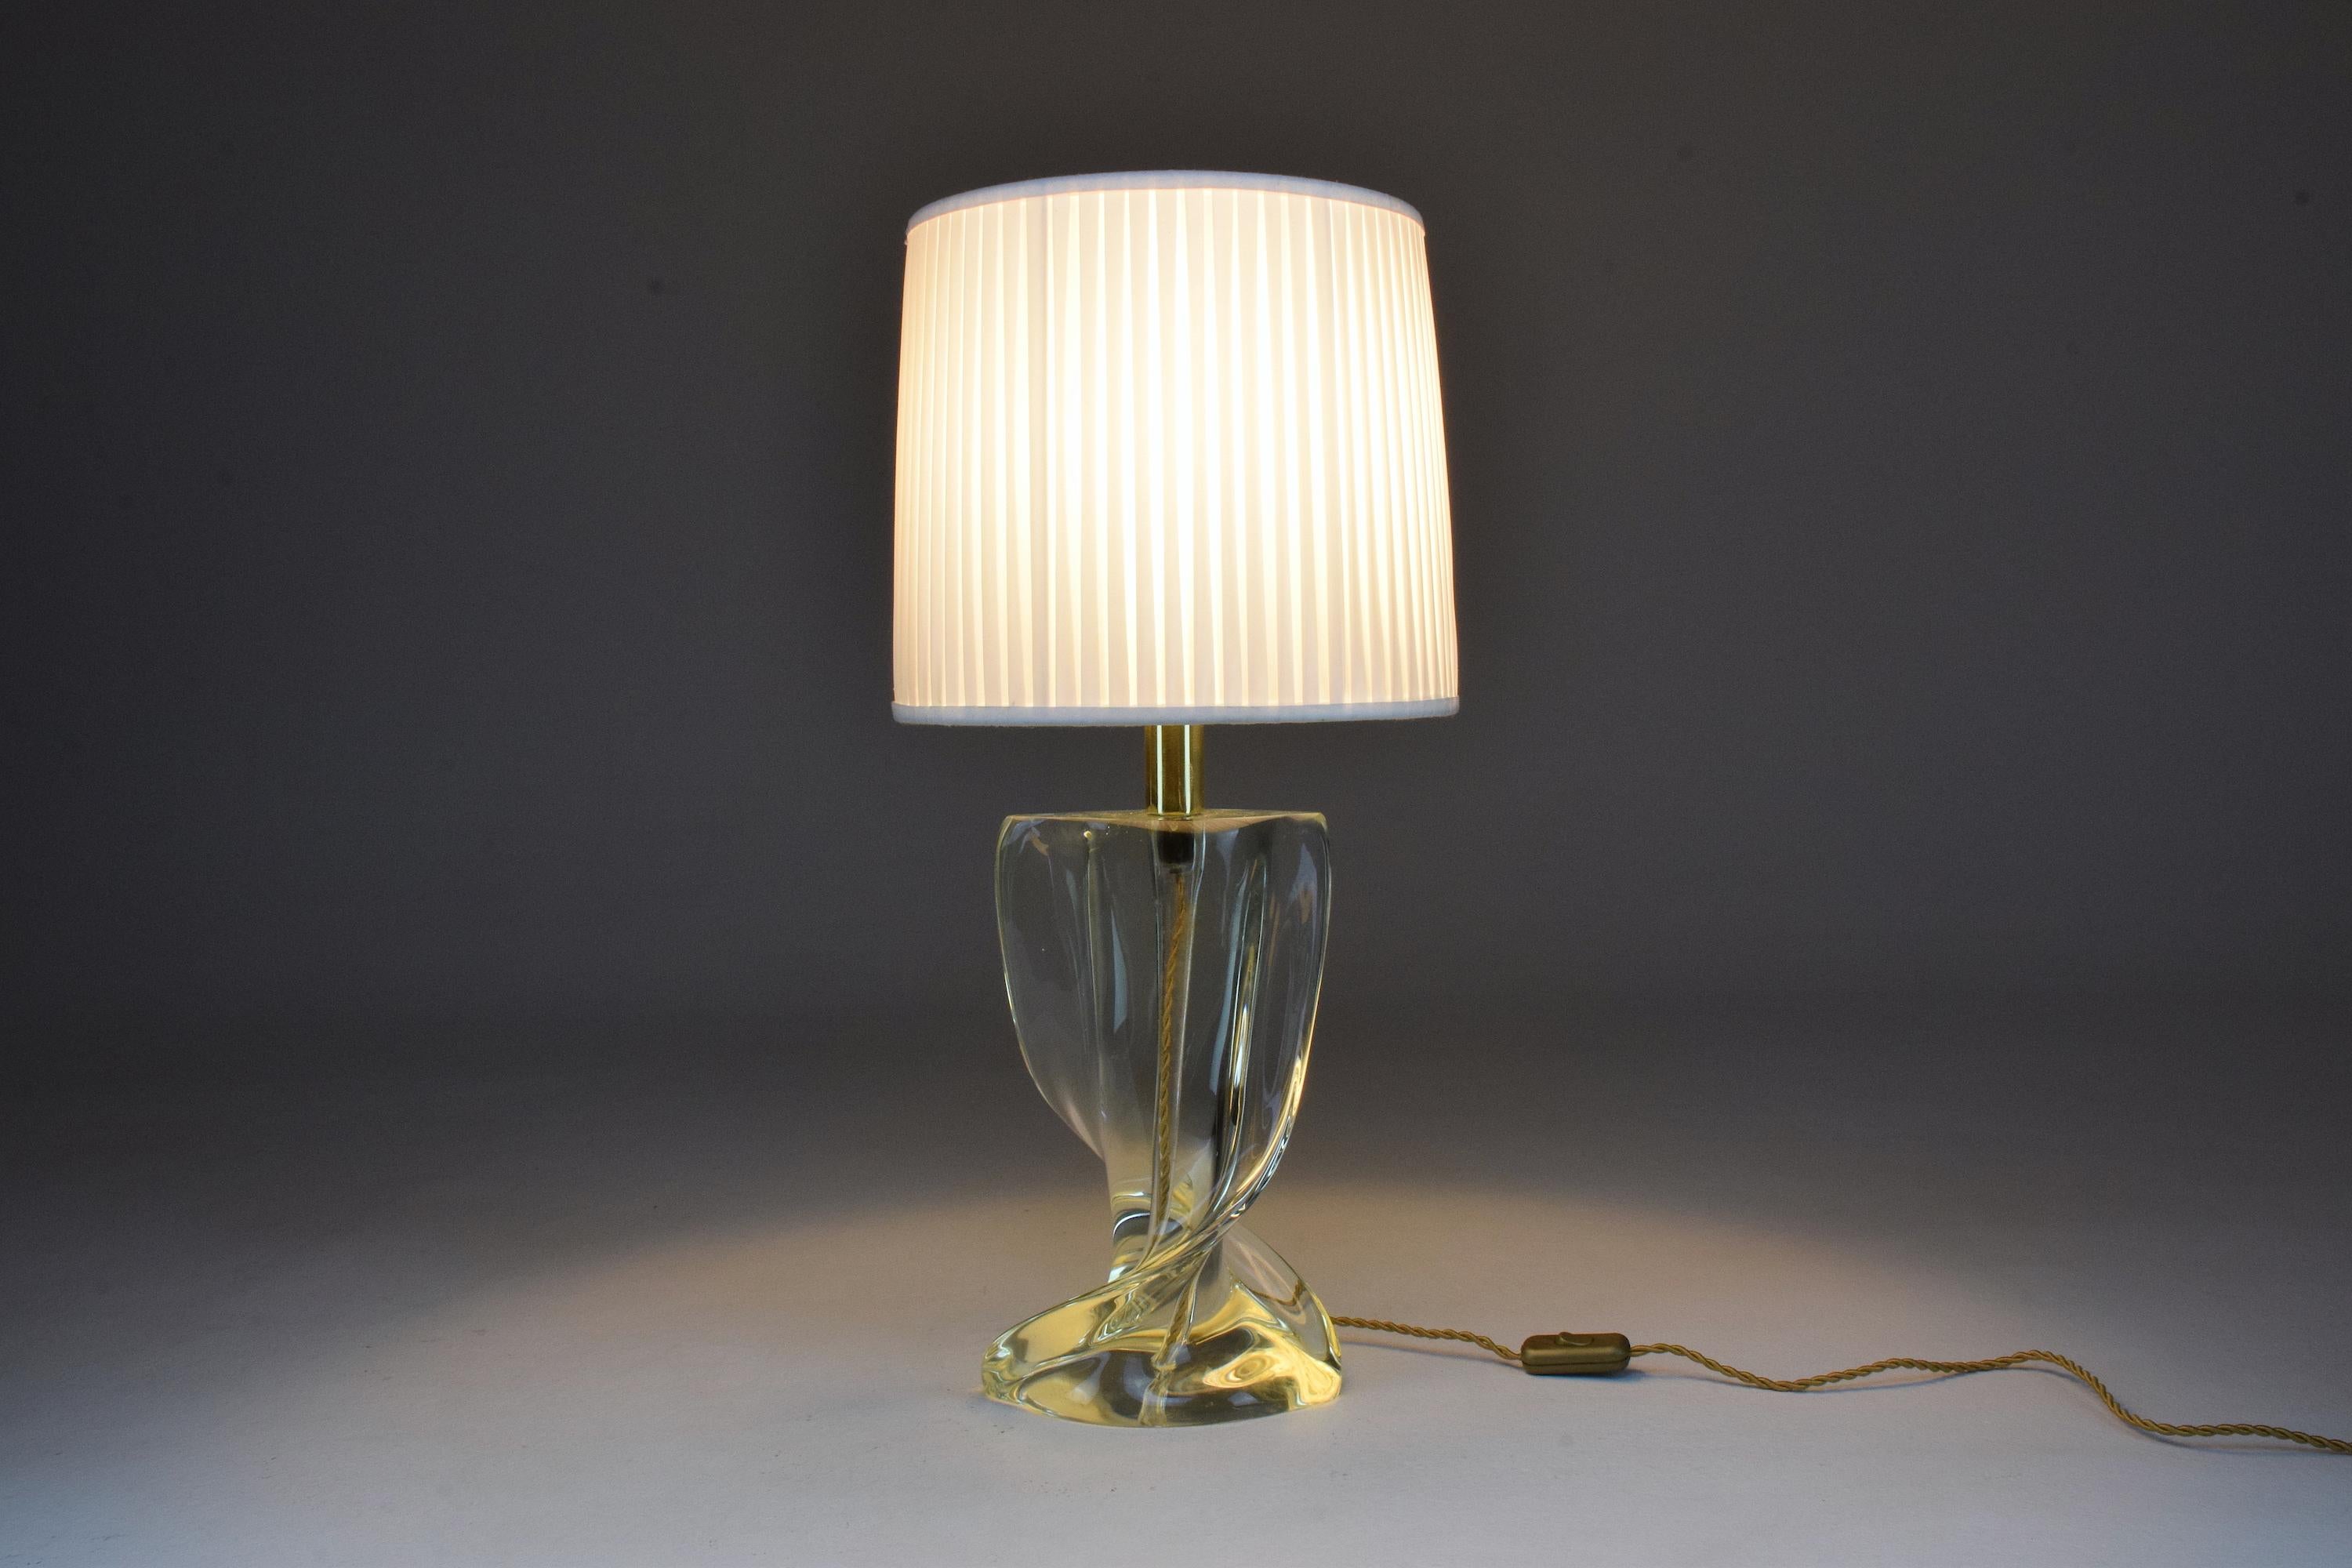 A midcentury vintage Italian light green crystal lamp in fully restored condition with an added brass sheet to the stem and new fabric pleated shade,
Italy, circa 1950s.
Art Deco style.
----
All our pieces are fully restored at our atelier and we